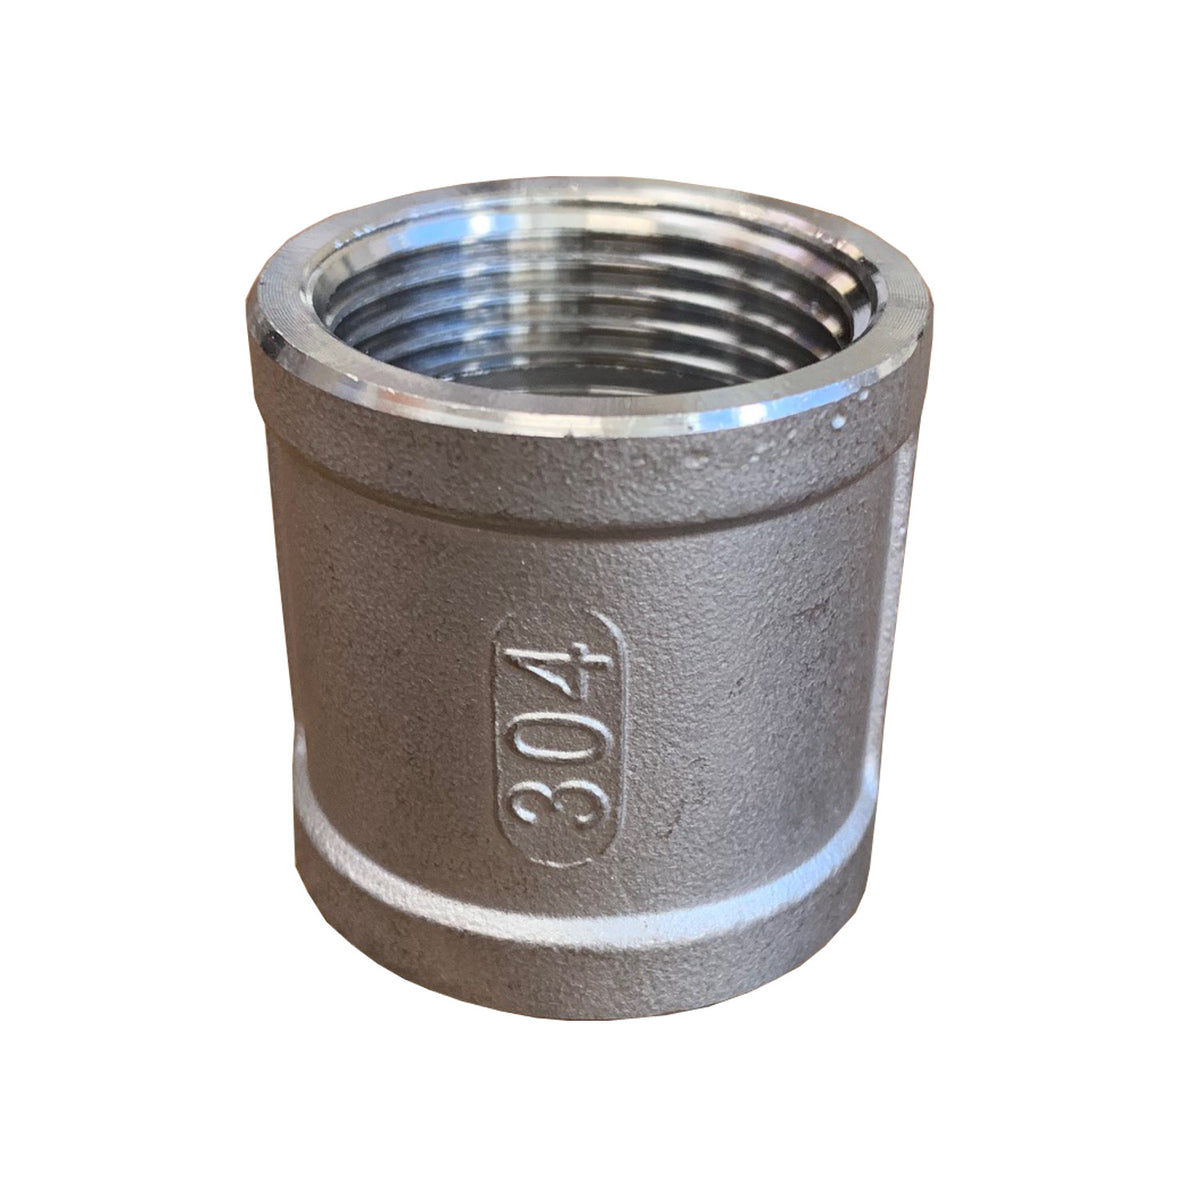 1 304 Stainless Steel Straight Coupling Class 150 Npt 2272